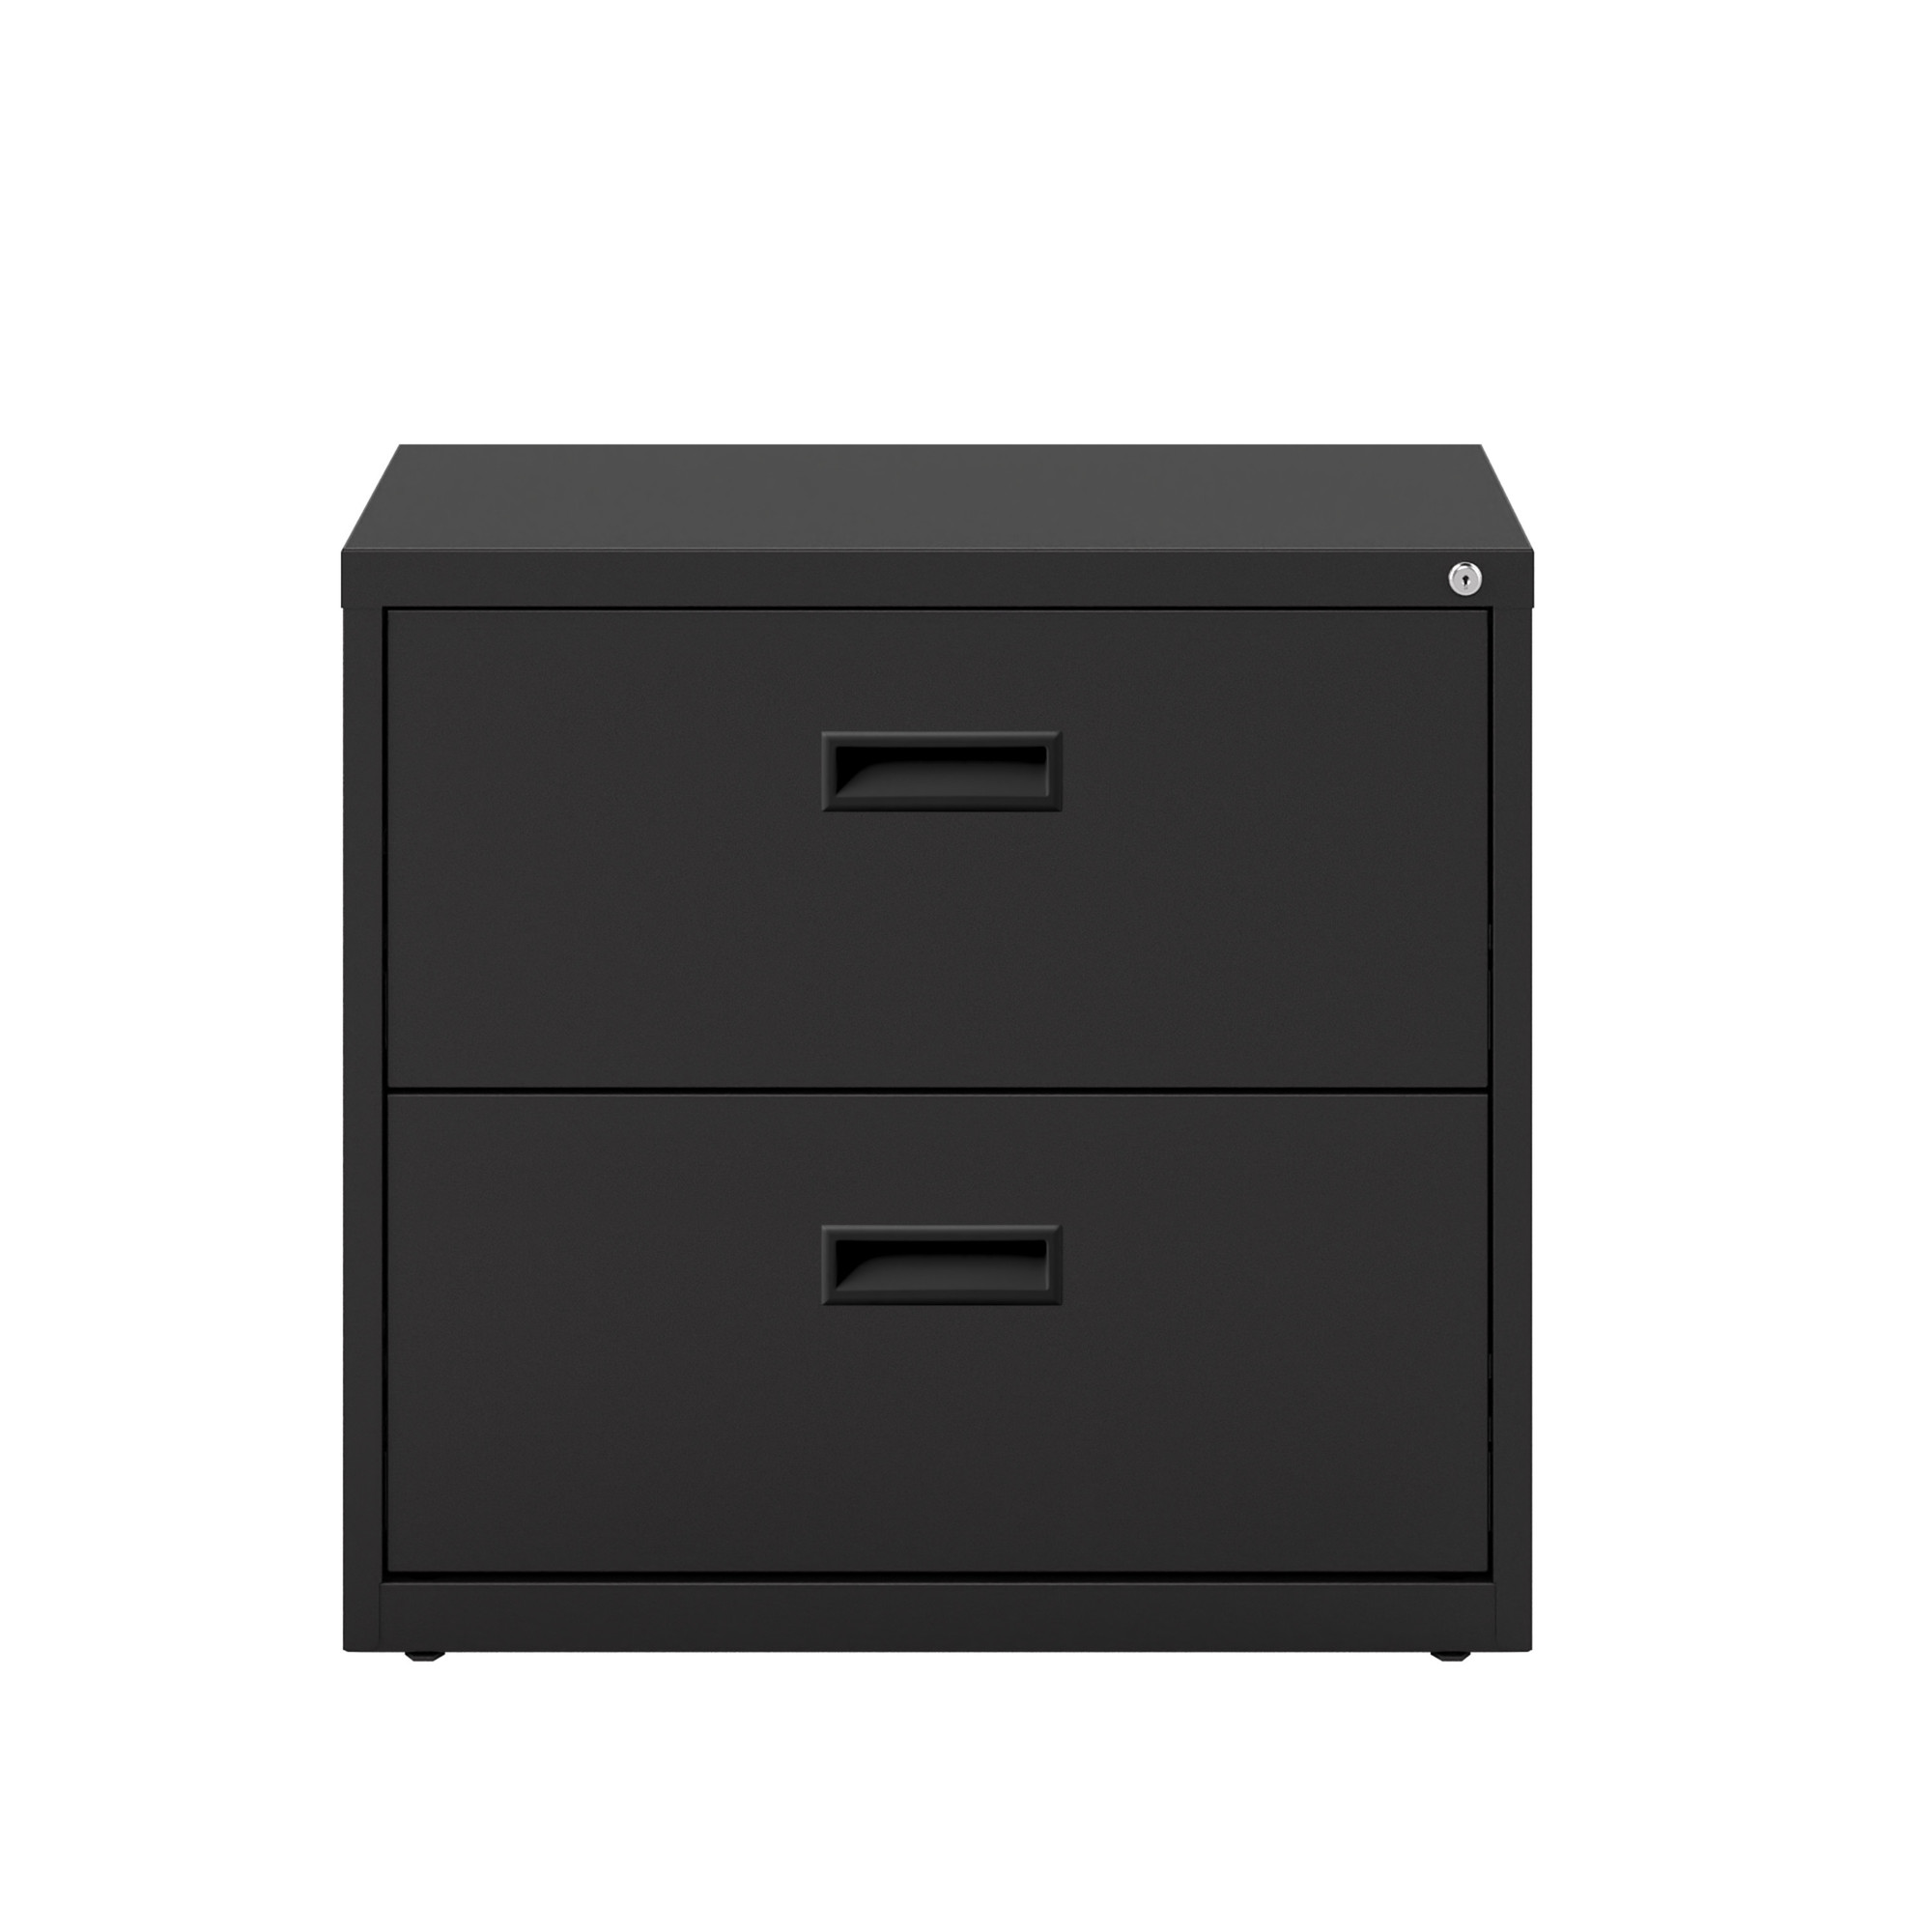 Hirsh Industries, 2 Drawer Lateral File Cabinet, Width 30 in, Depth 17.63 in, Height 27.75 in, Model 19296